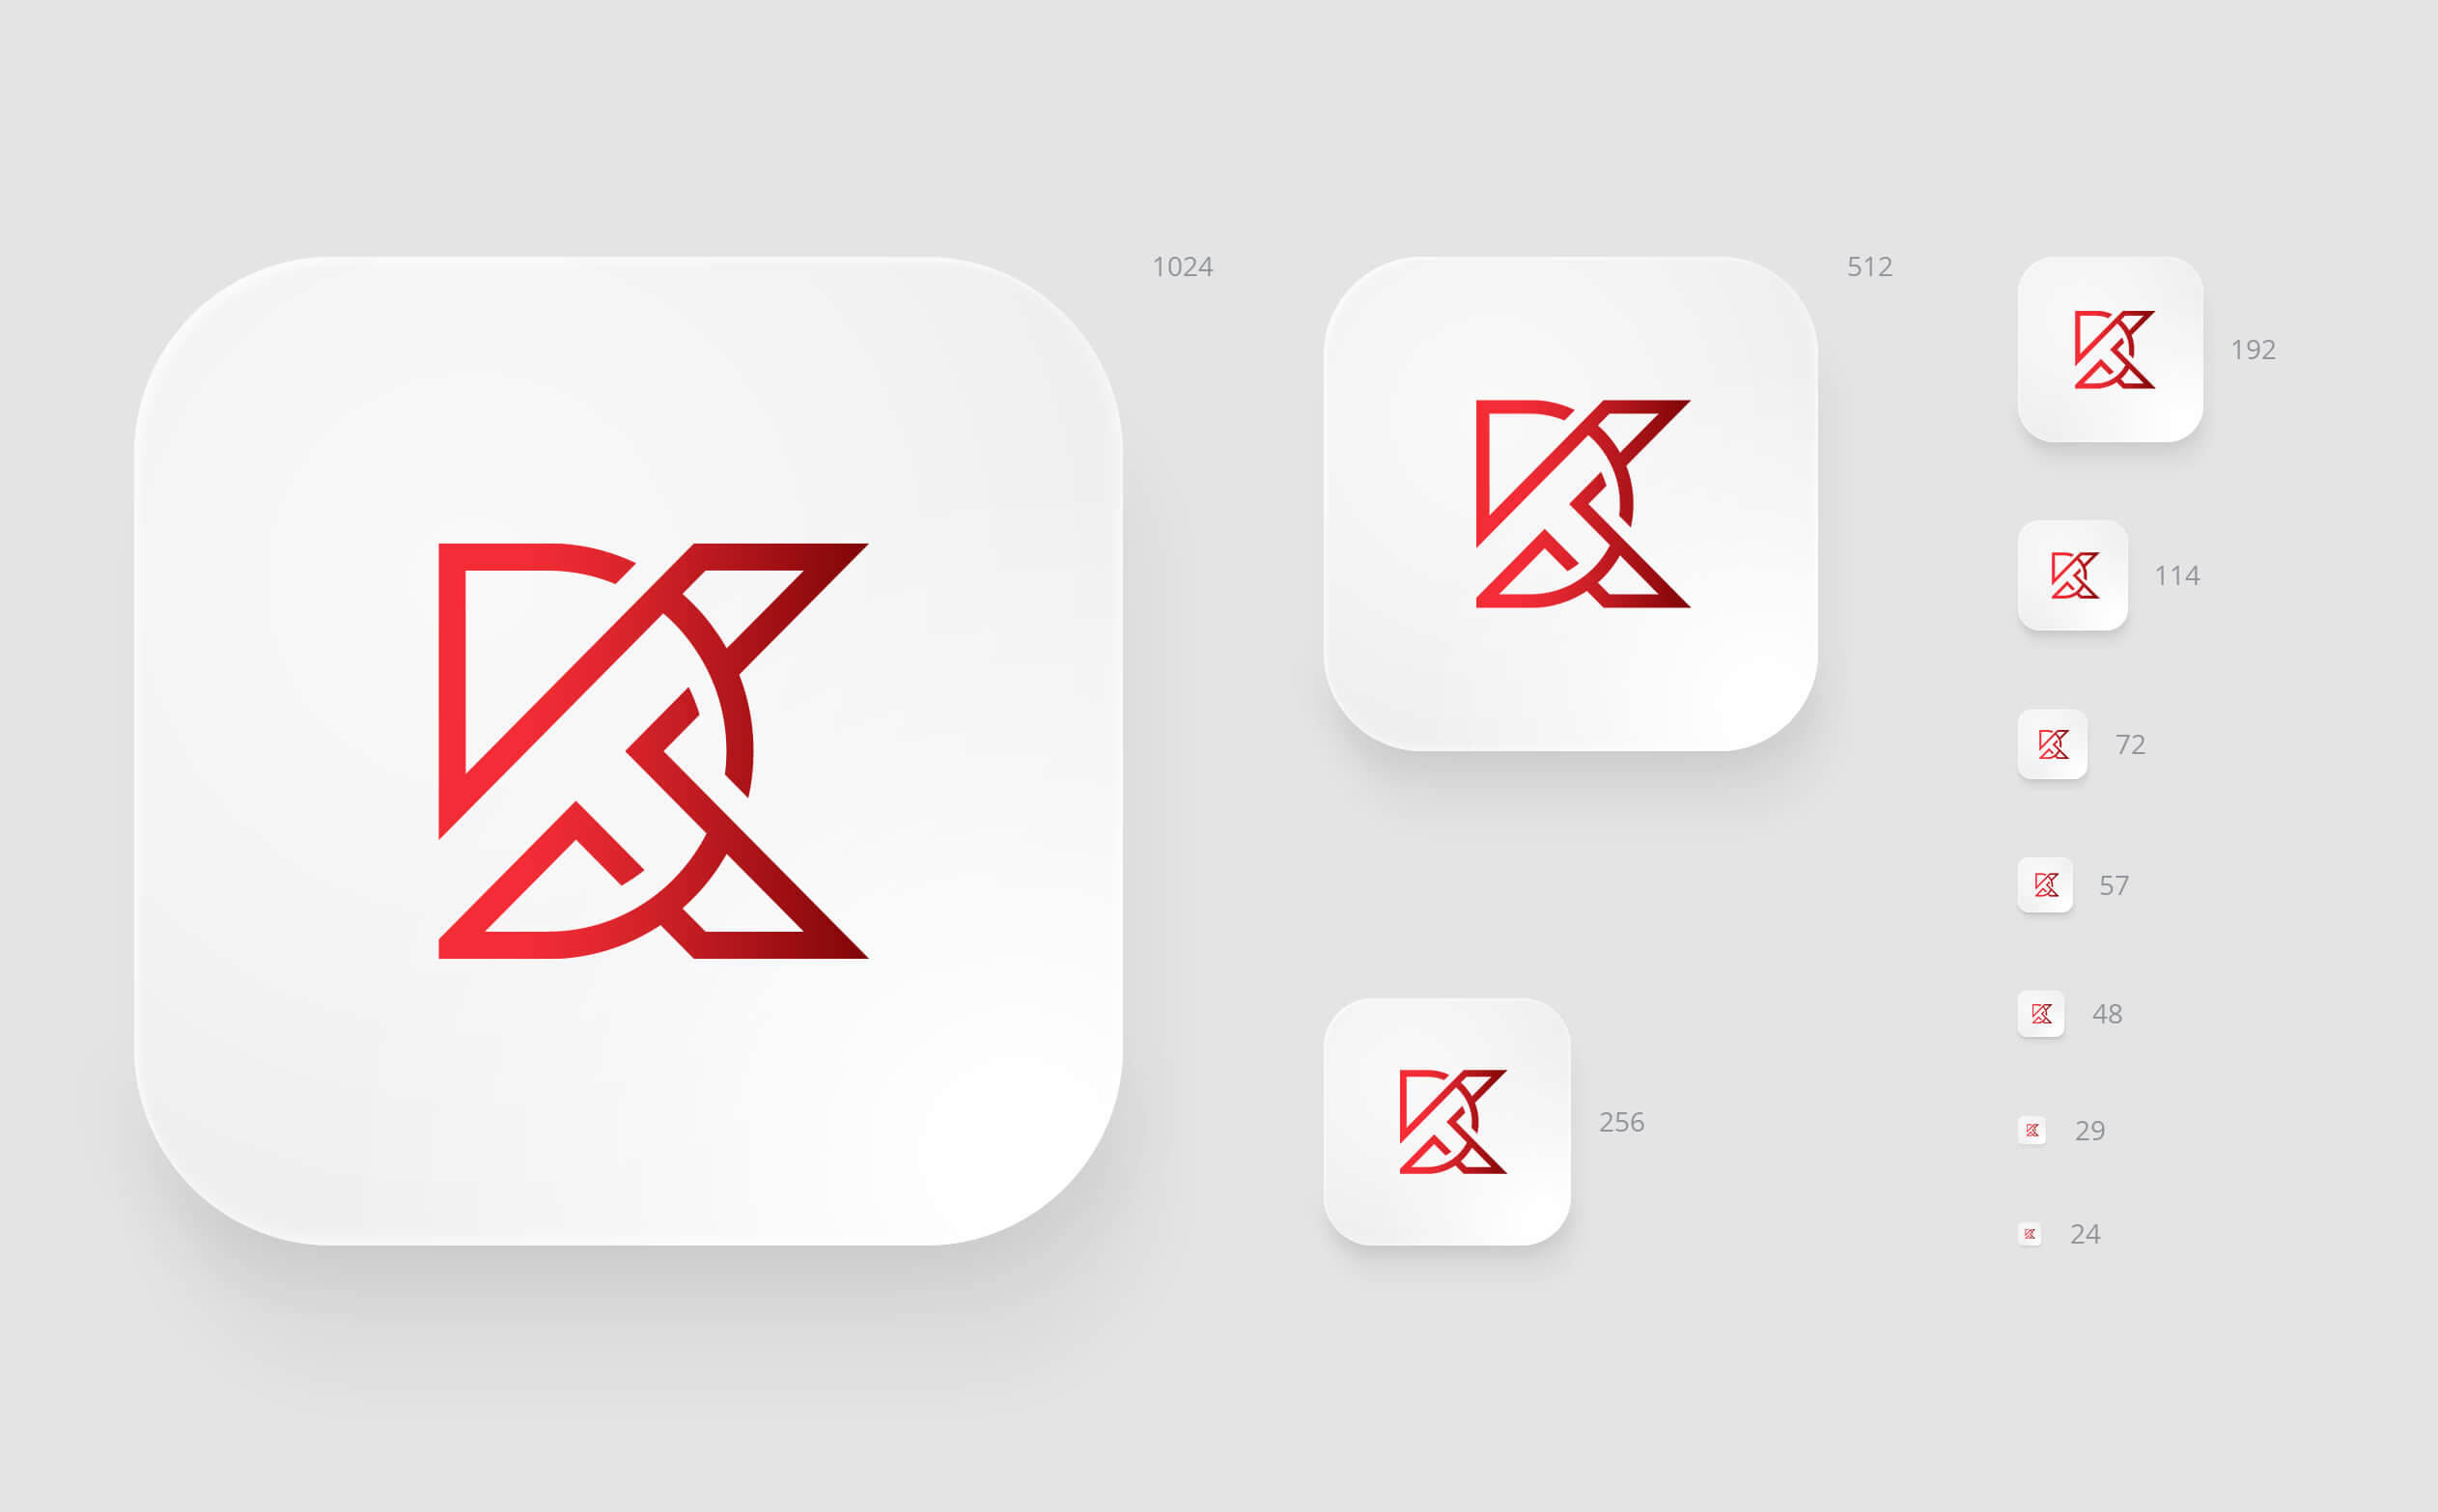 DK Icon Designs for IOS